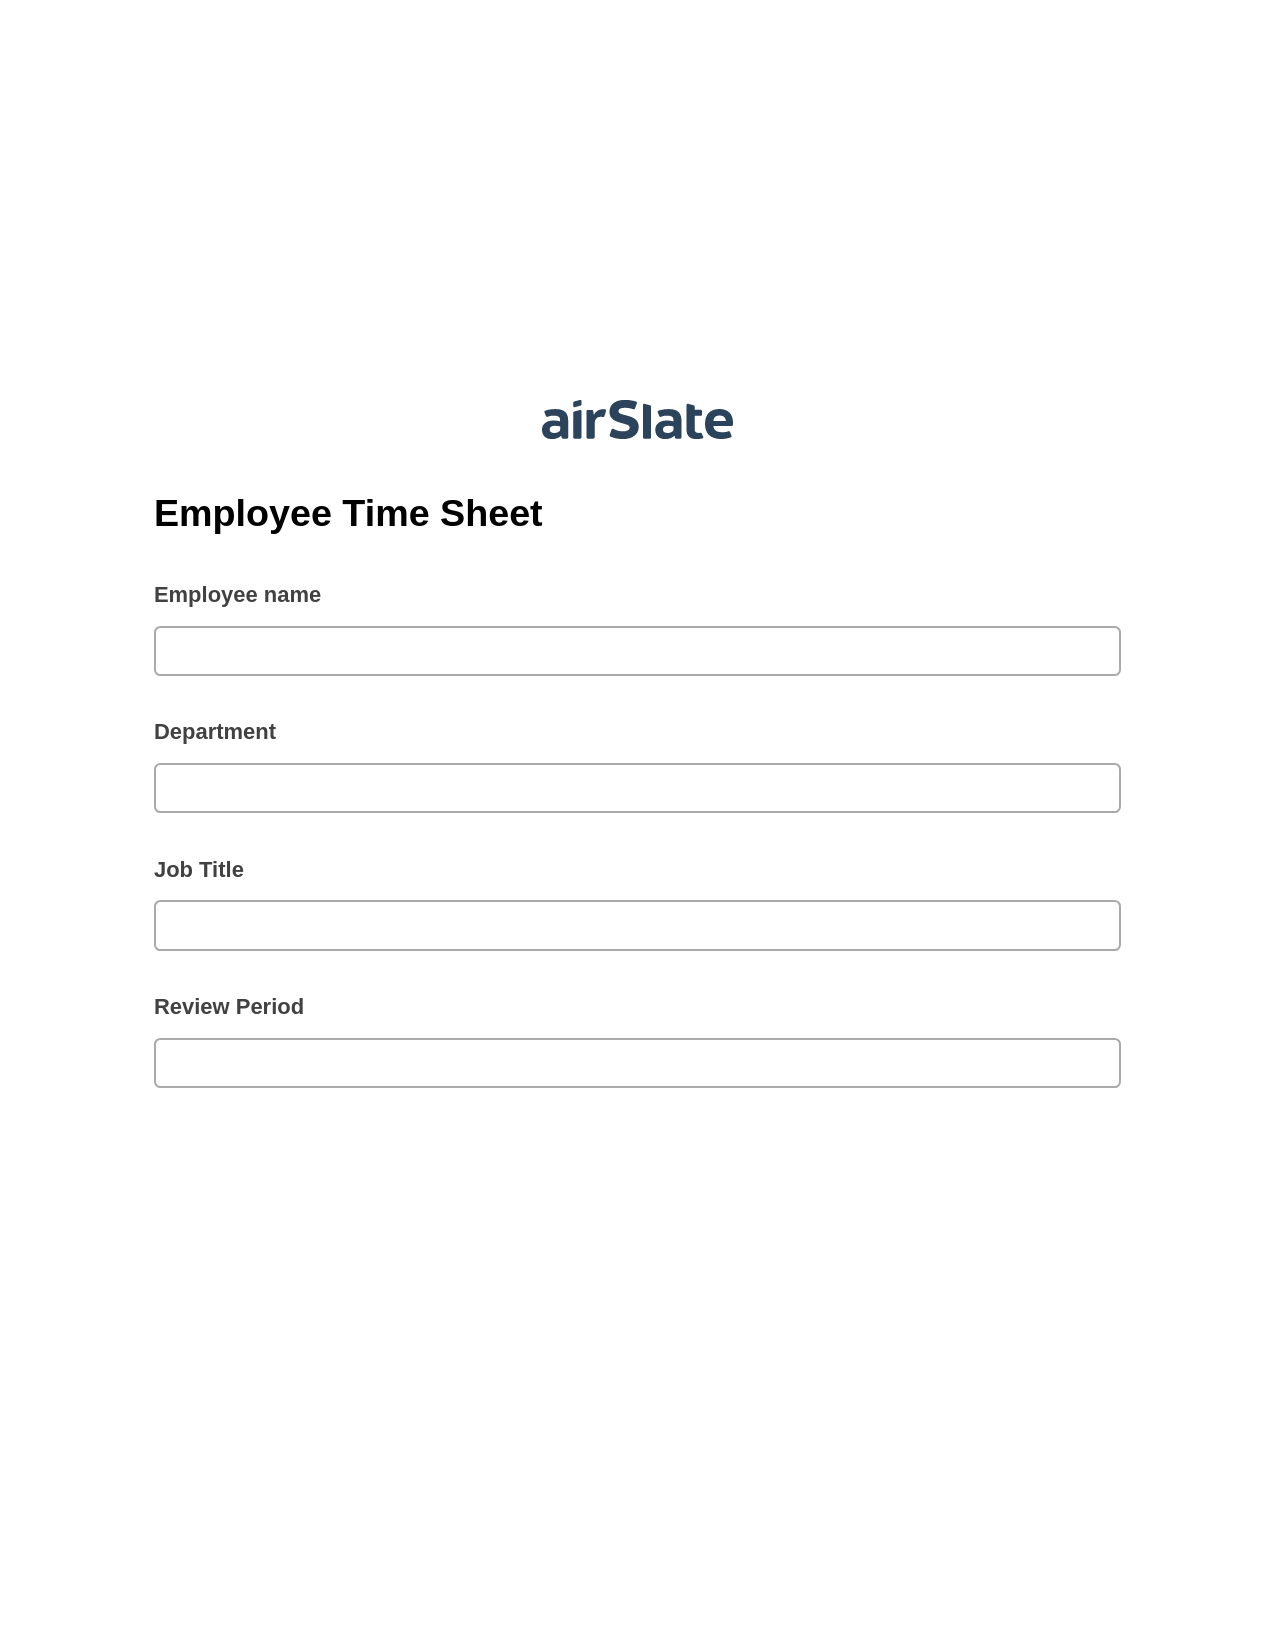 Employee Time Sheet Prefill from NetSuite records, Update Audit Trail Bot, Export to Salesforce Record Bot